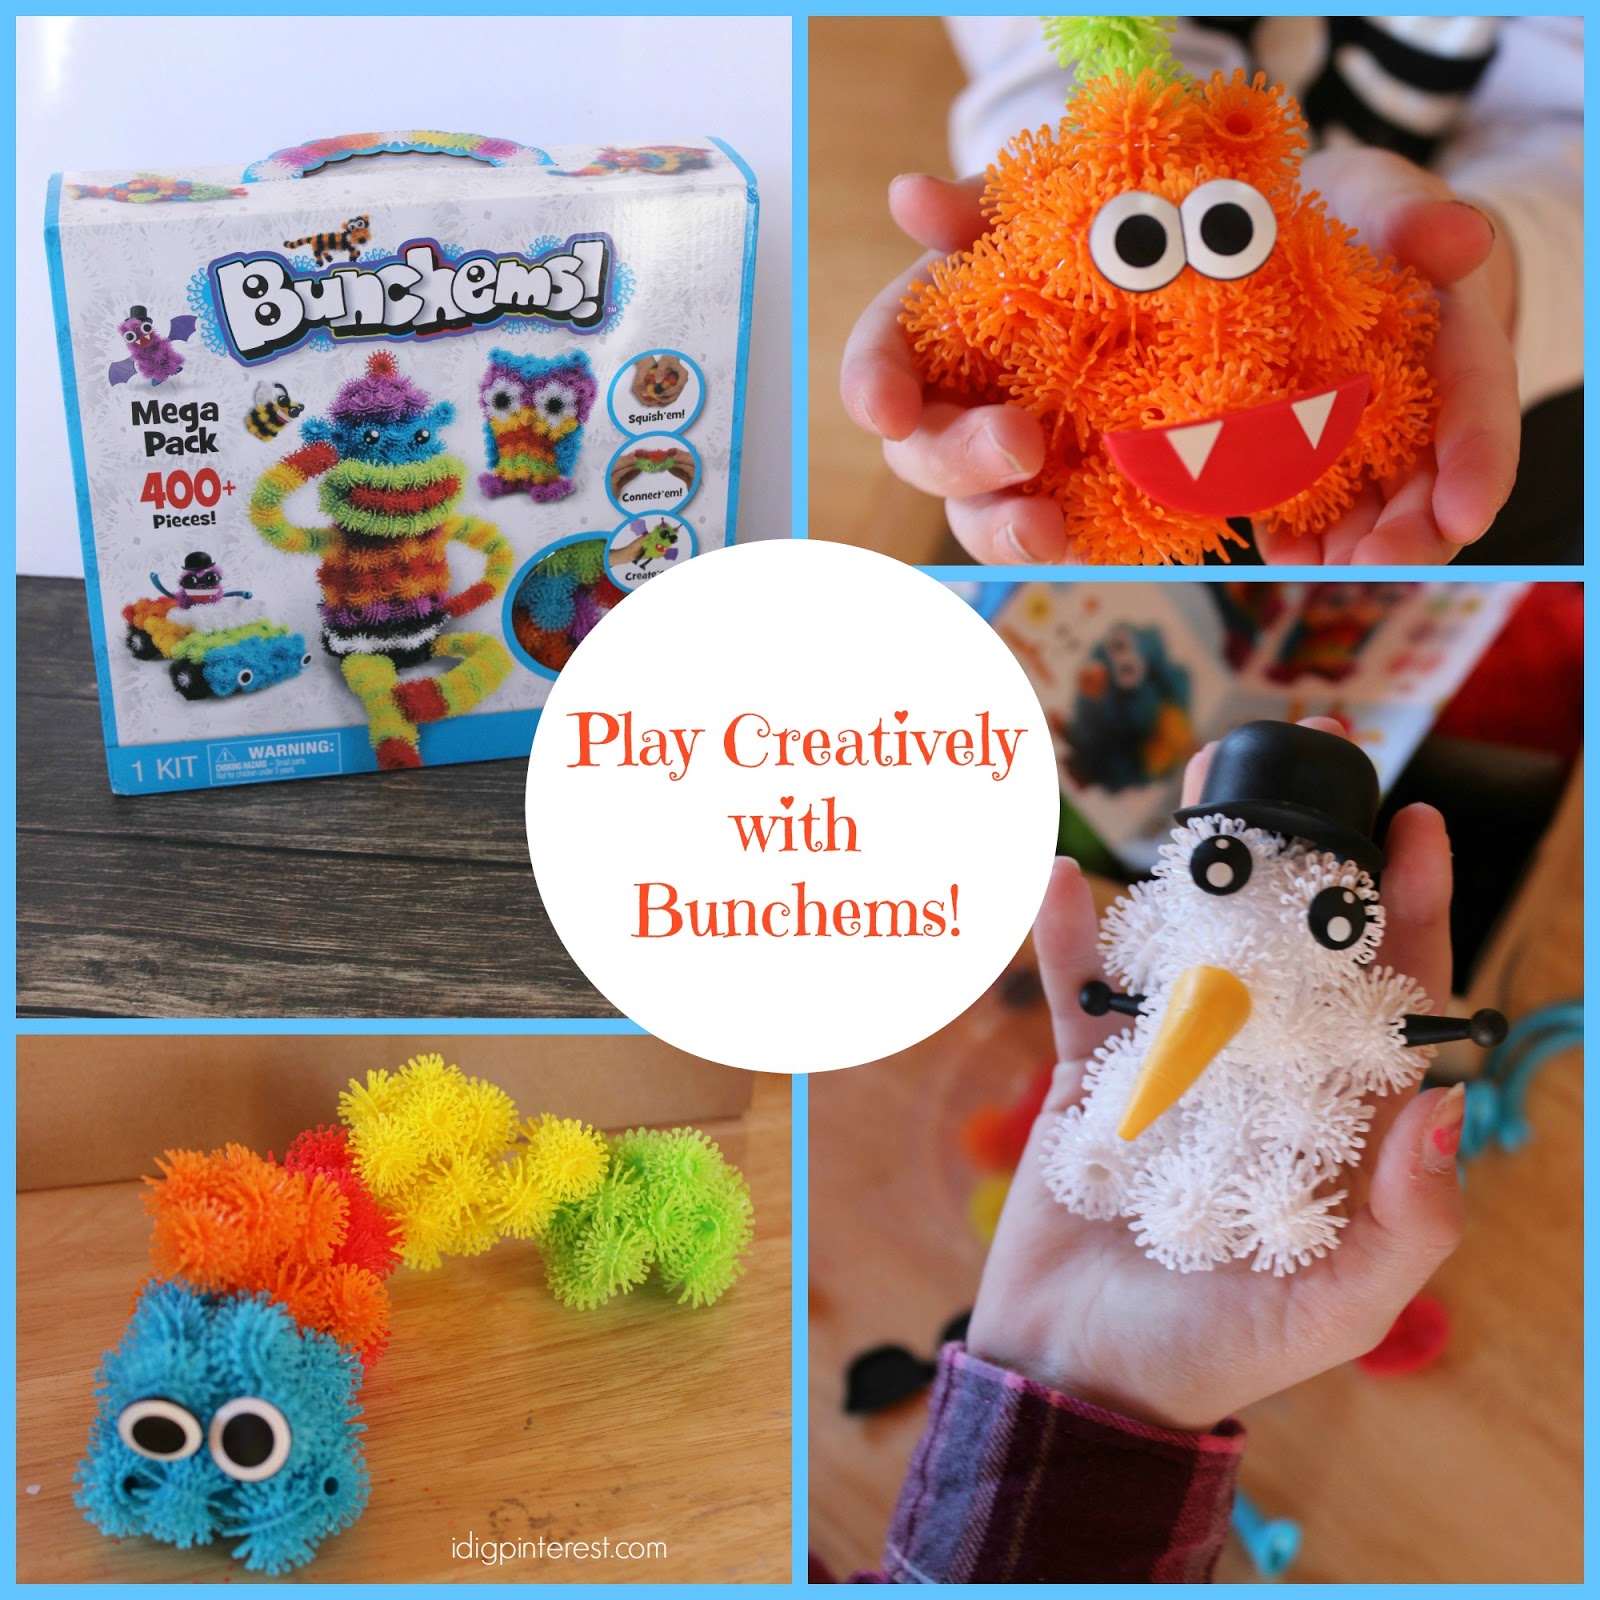 Play Creatively with Bunchems - I Dig Pinterest